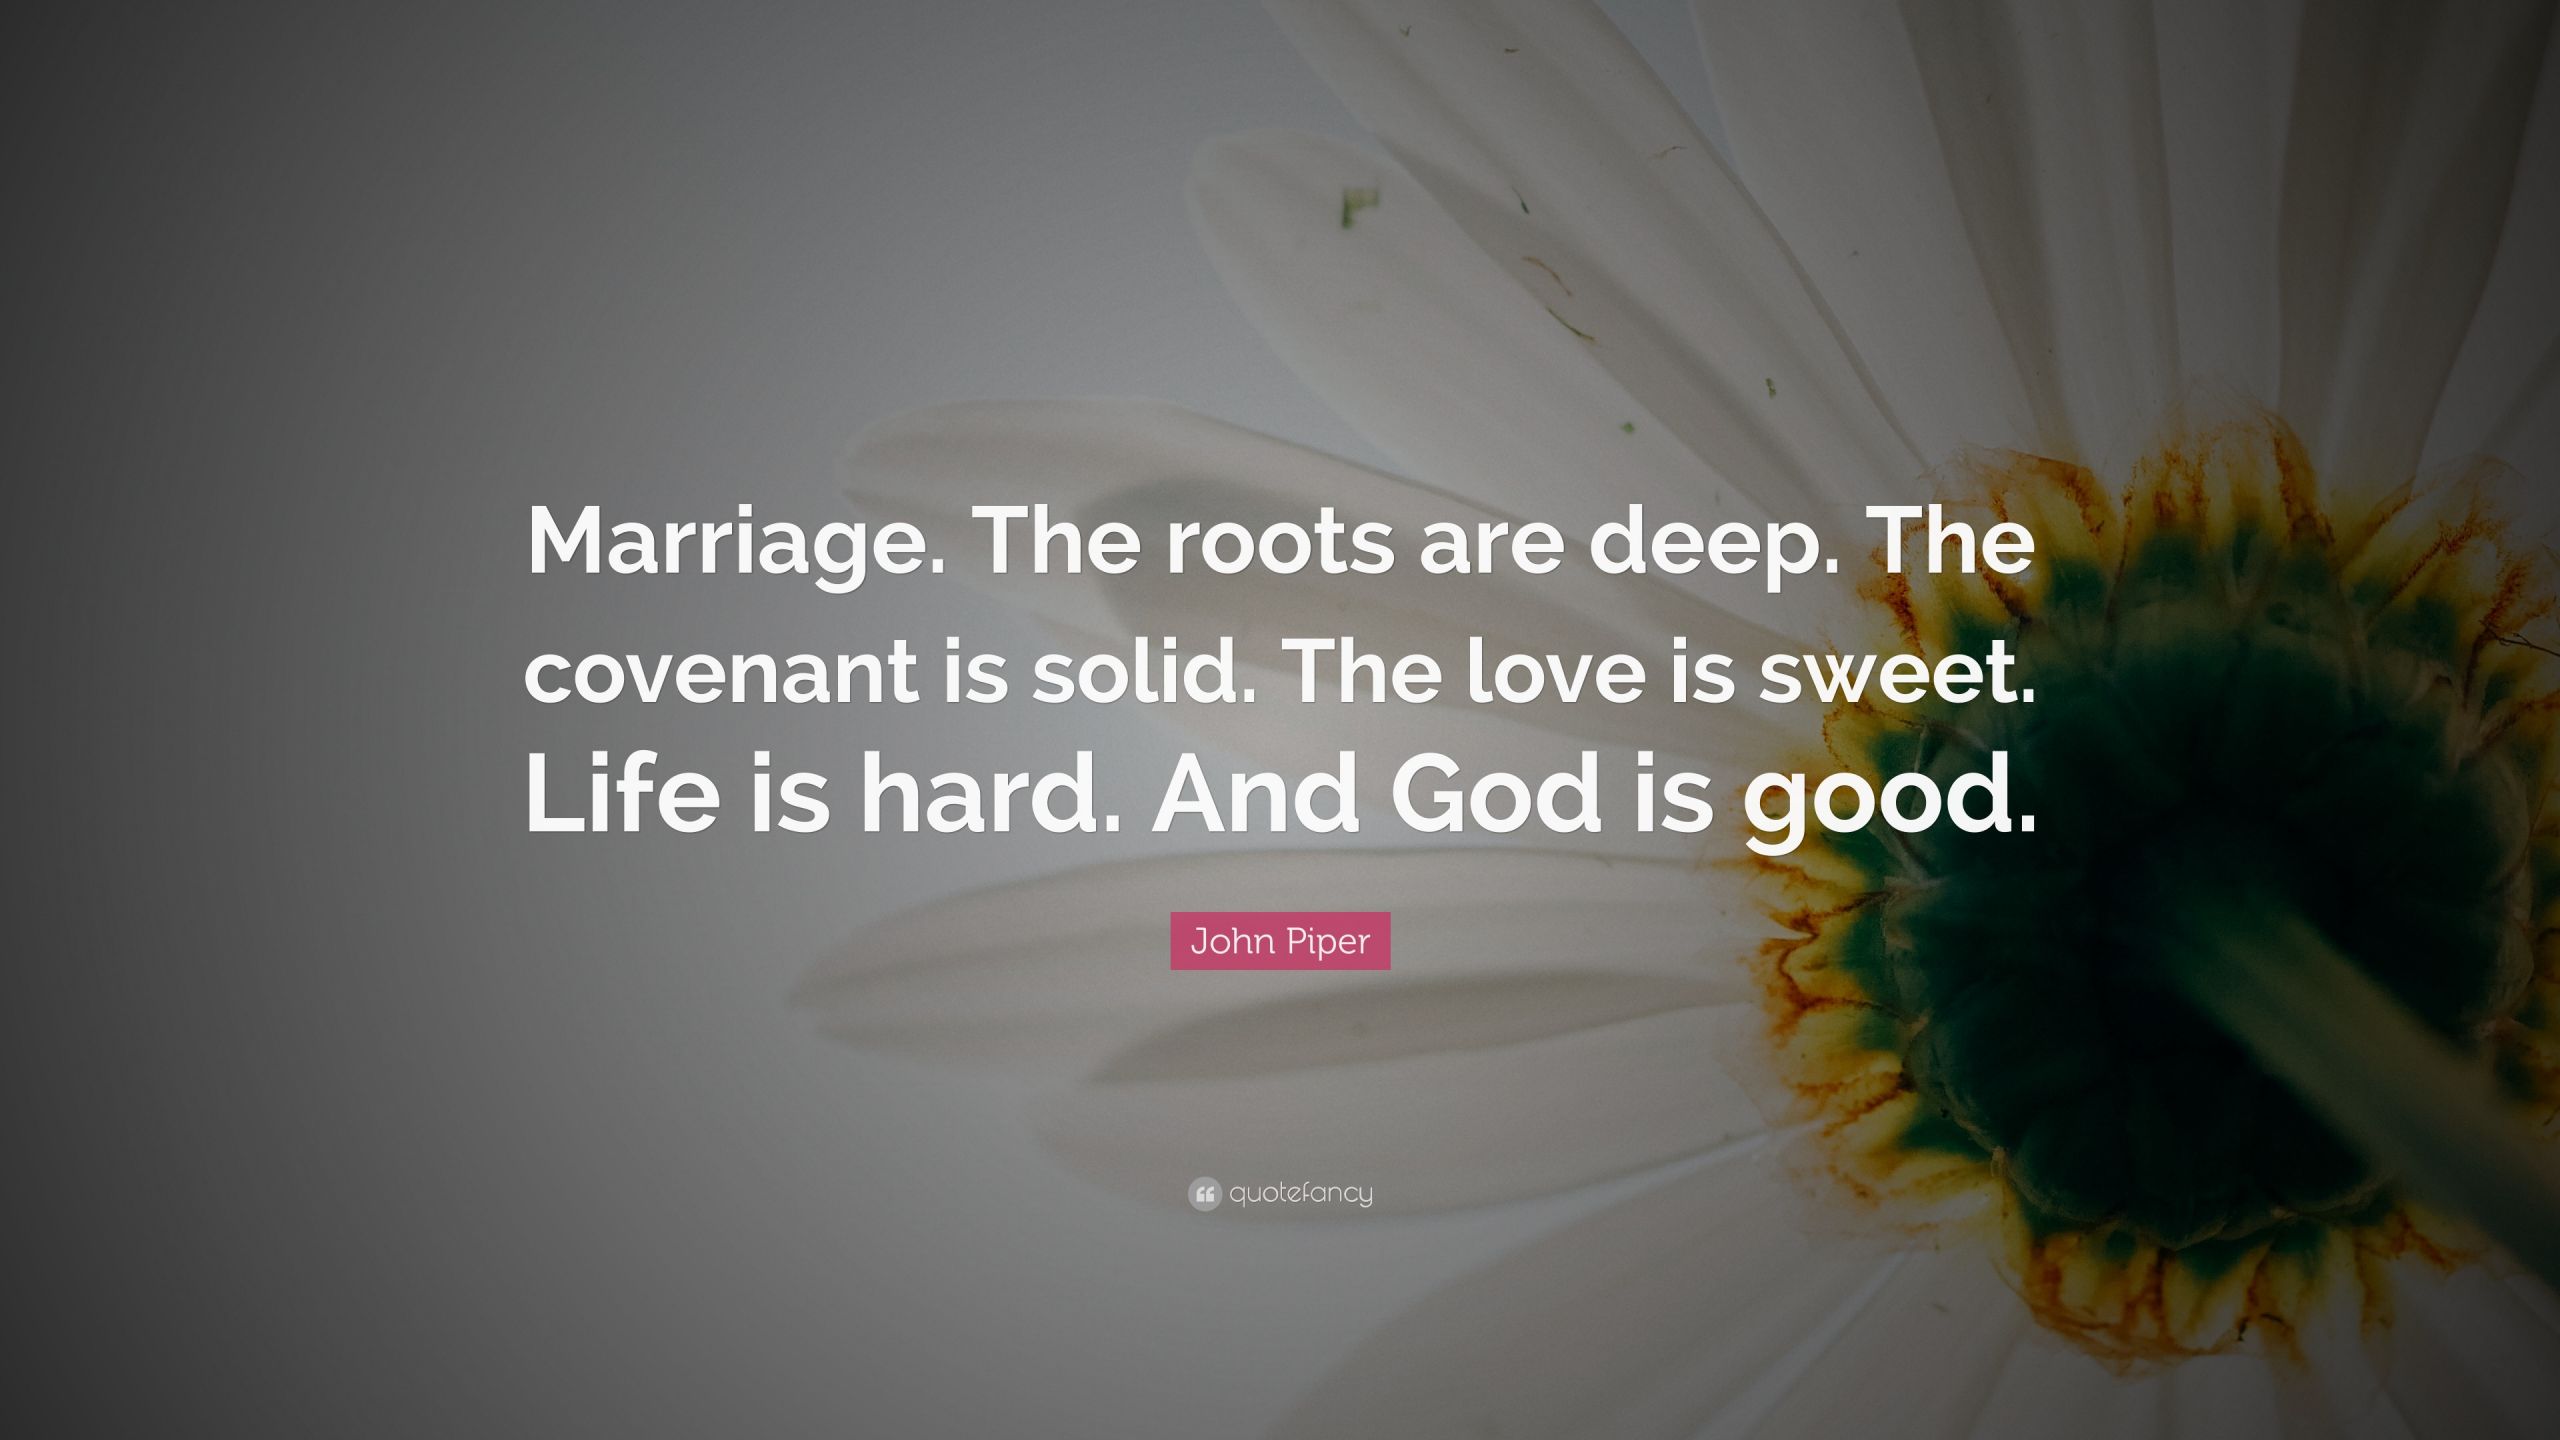 John Piper Marriage Quote
 John Piper Quote “Marriage The roots are deep The